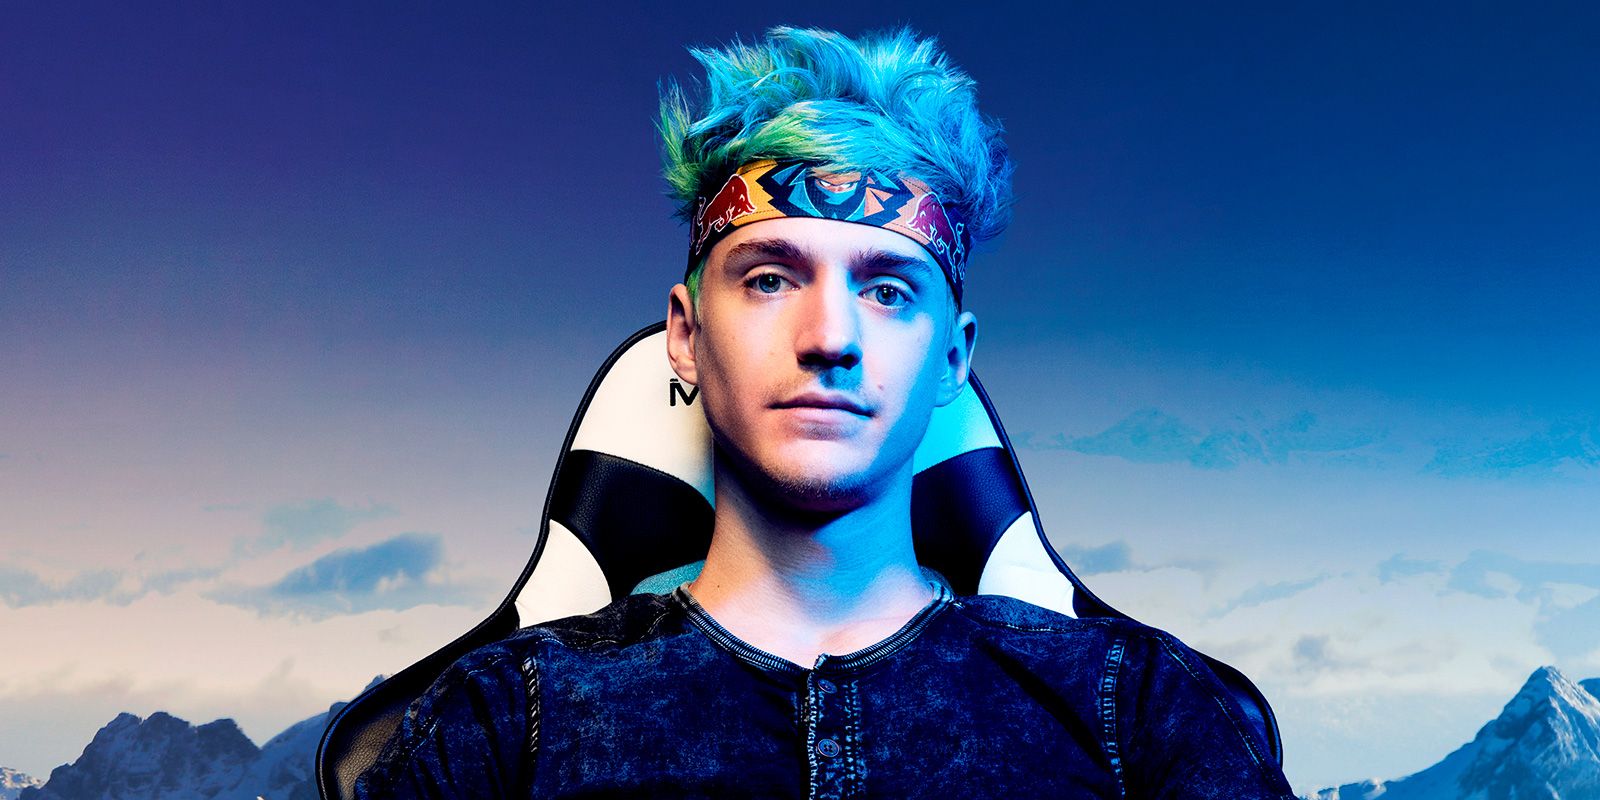 Ninja's Mixer Deal Was Even More Tragic Than You Realized